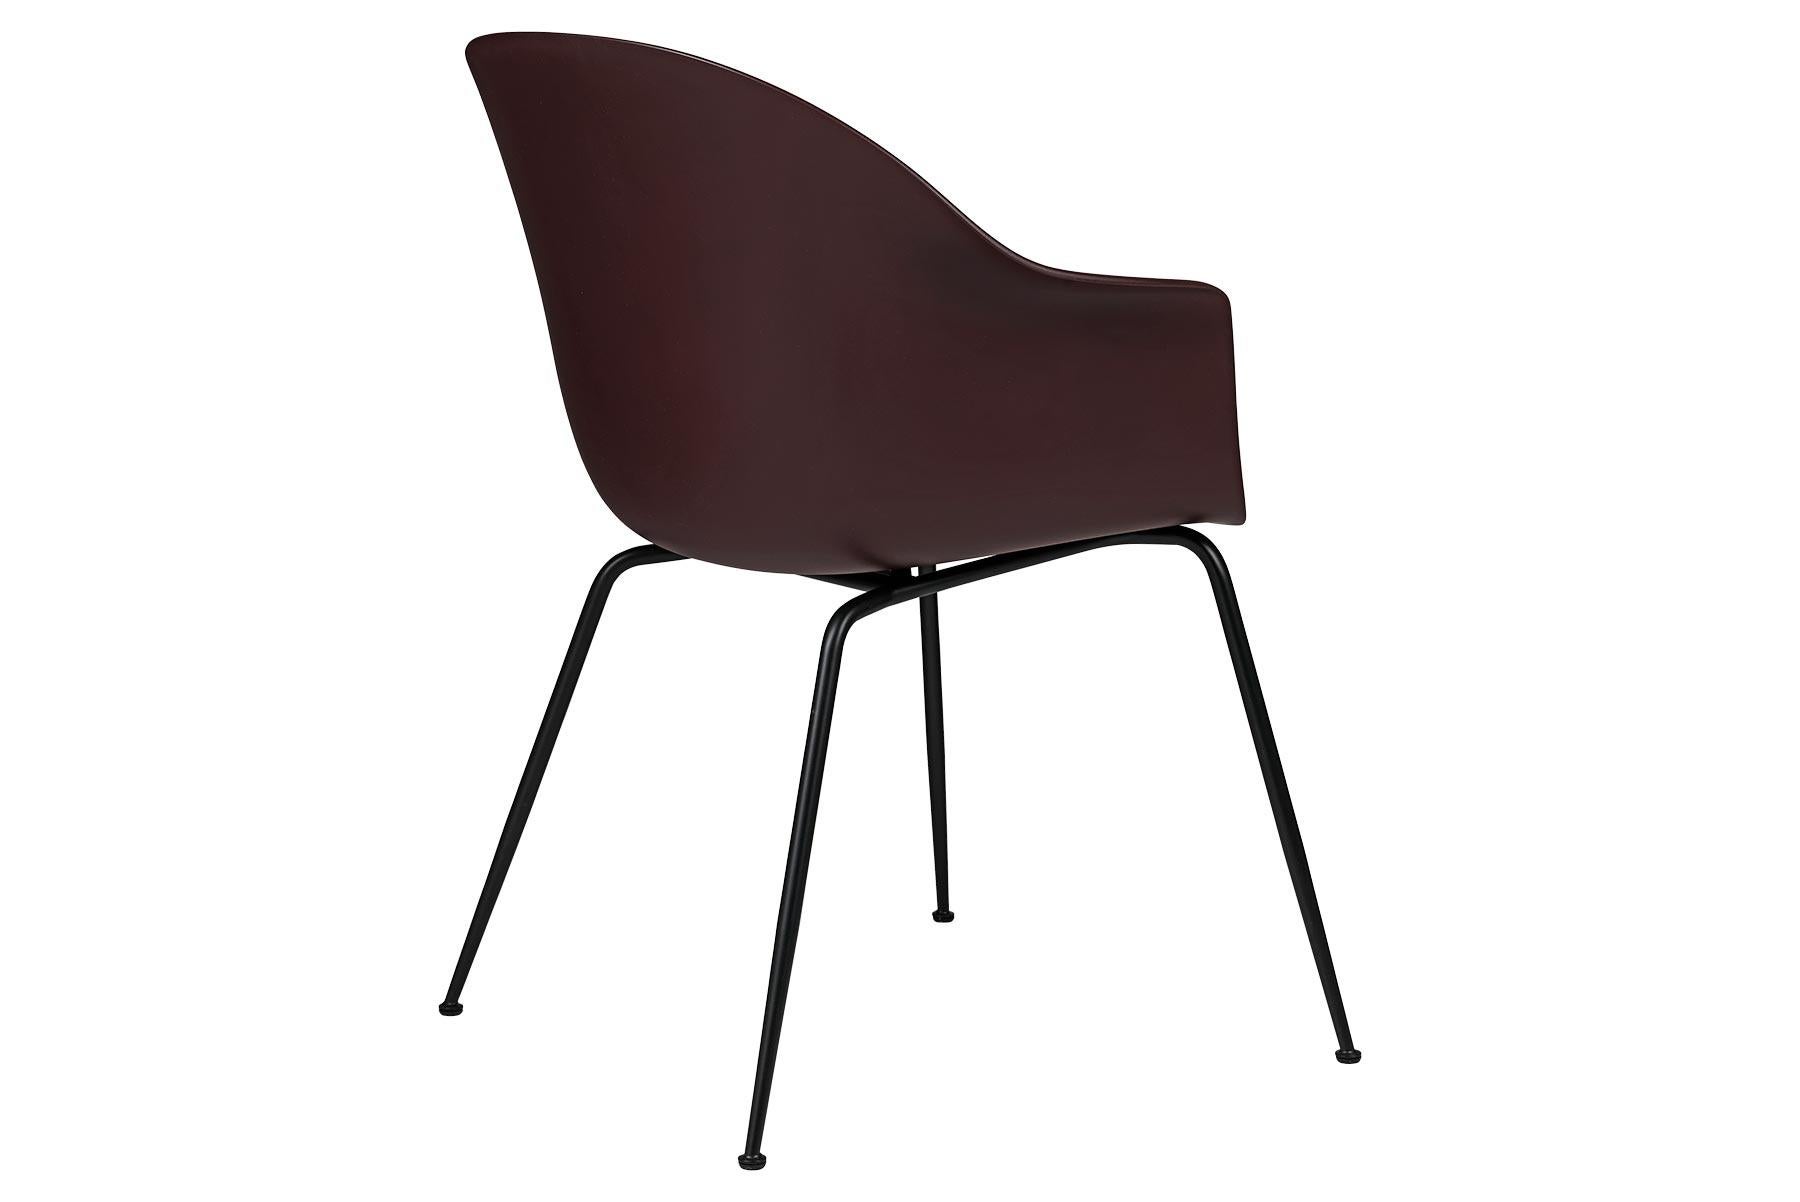 Bat Dining Chair, Un-Upholstered, Conic Base, Matte Black In New Condition For Sale In Berkeley, CA